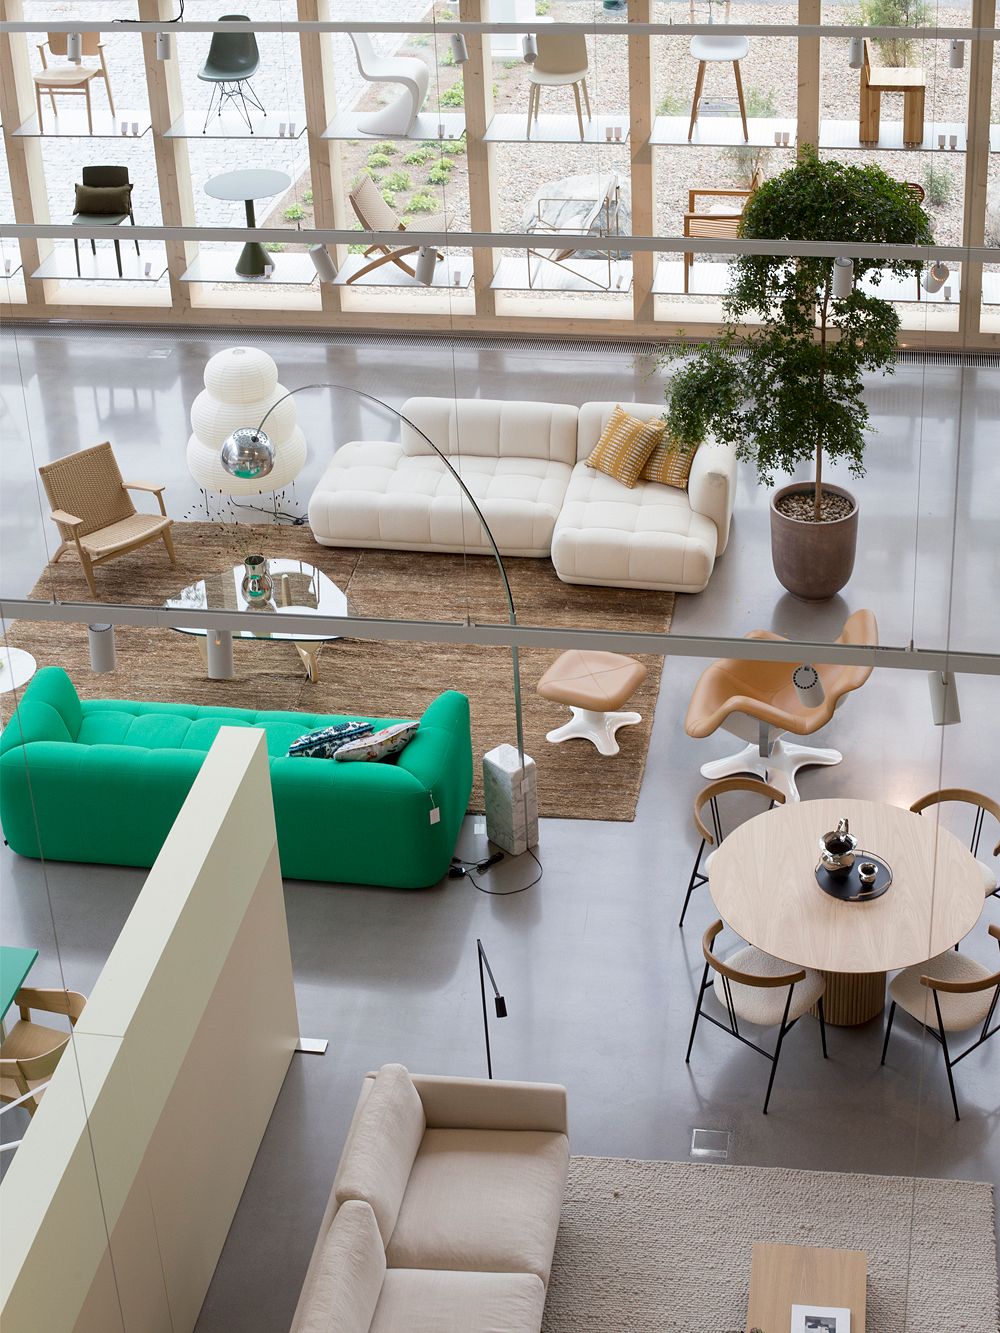 An image of Finnish Design Shop's showroom.